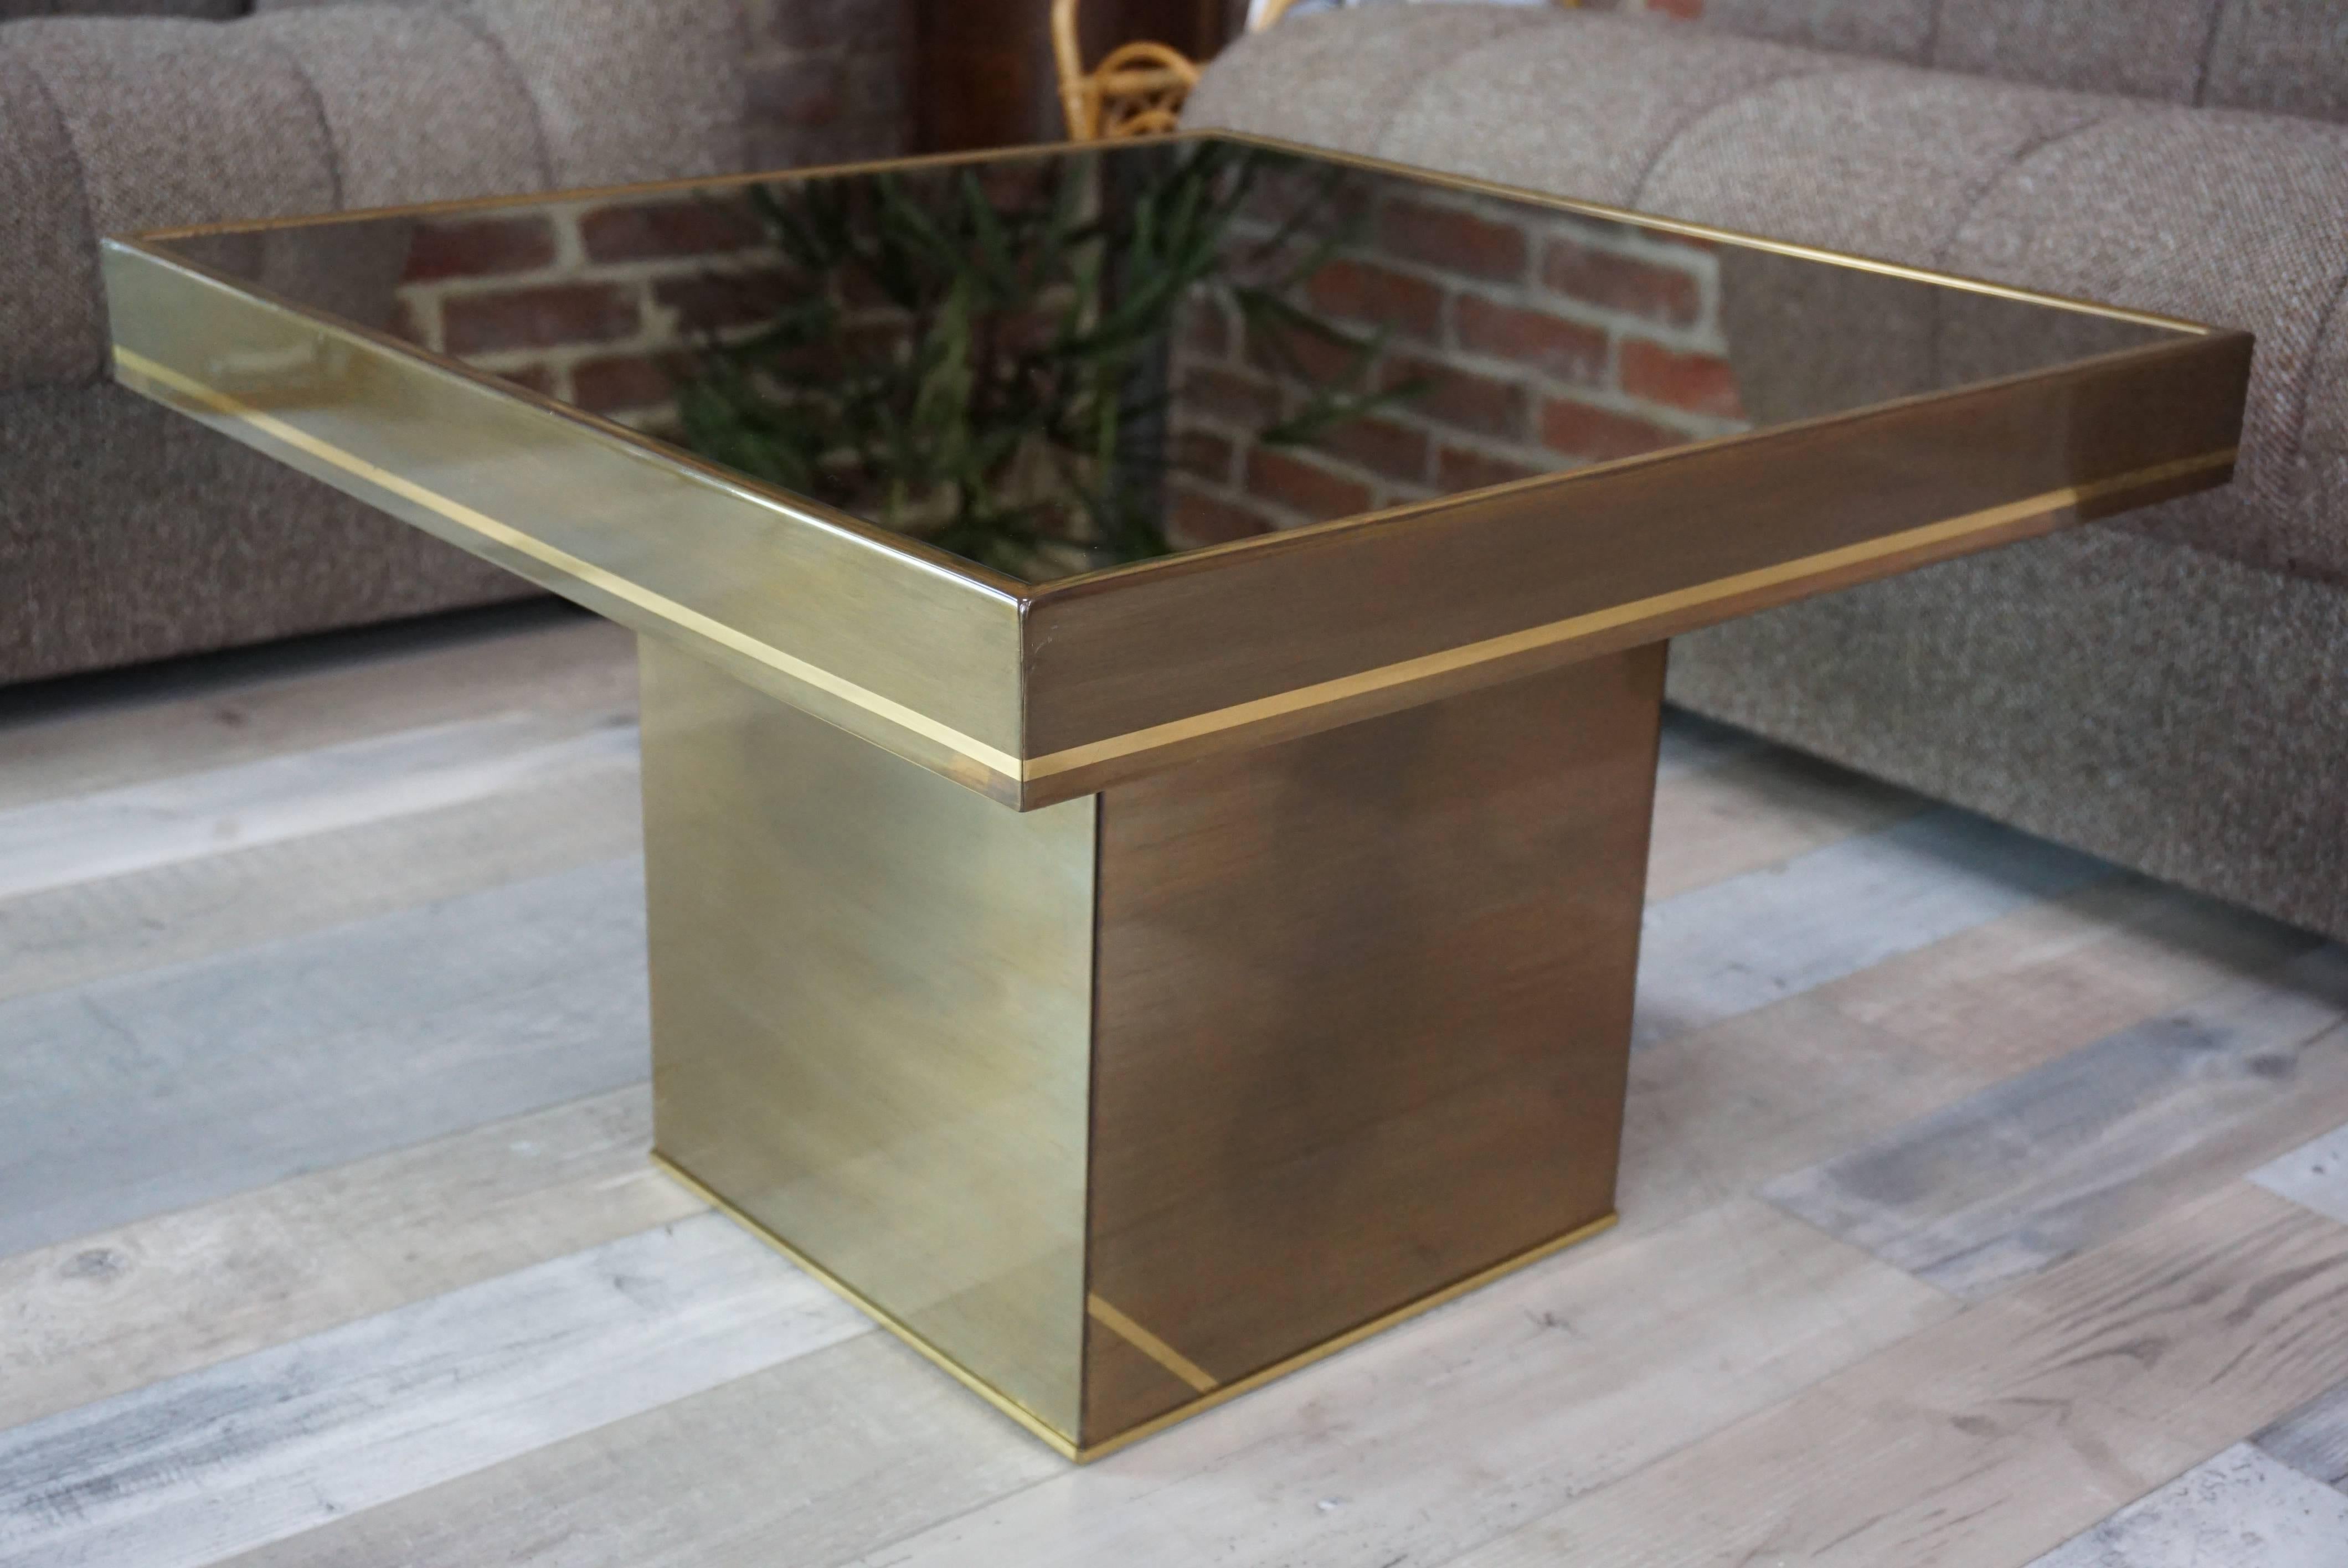 Prestance, shine and character for this coffee table, Dutch design at the manner of Georges Mathias and Roger Vanhevel, in bronze varnished metal bronzed tinted mirror and brass edging. A centerpiece in your interior in excellent condition.